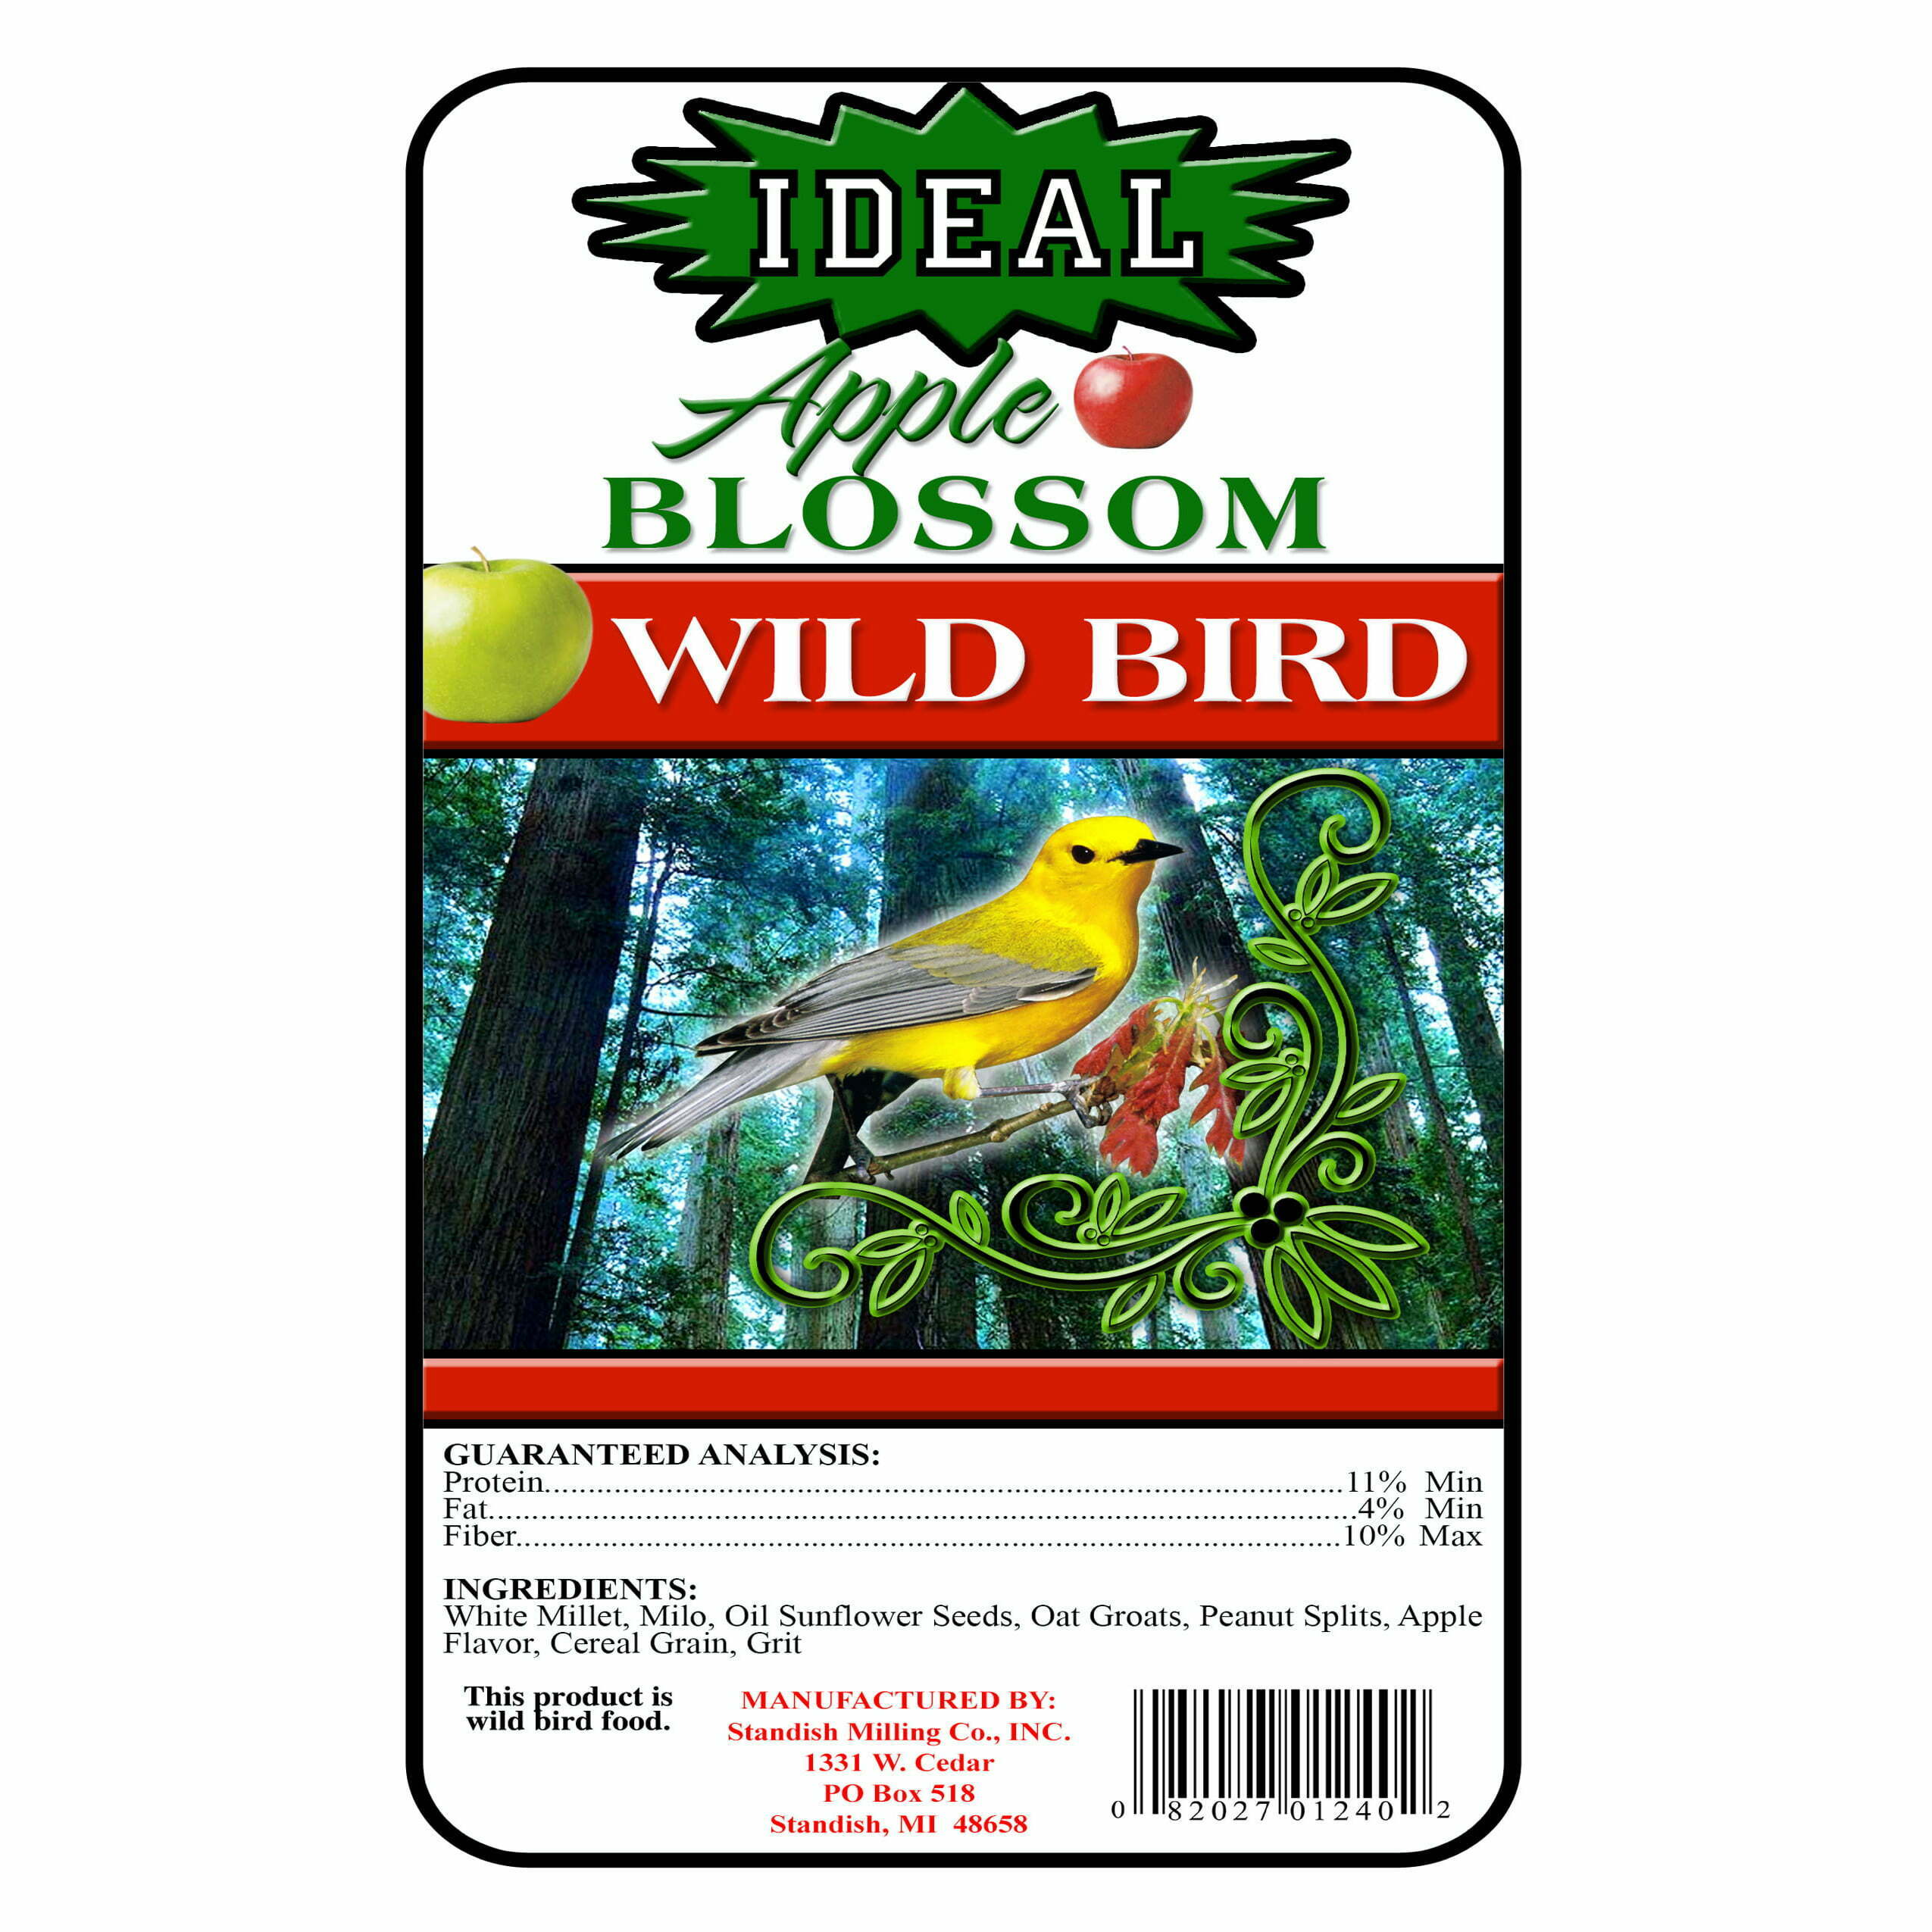 IDEAL Apple Blossom Wild Bird Seed - Available in 10.0, 20.0, and 40.0 lbs